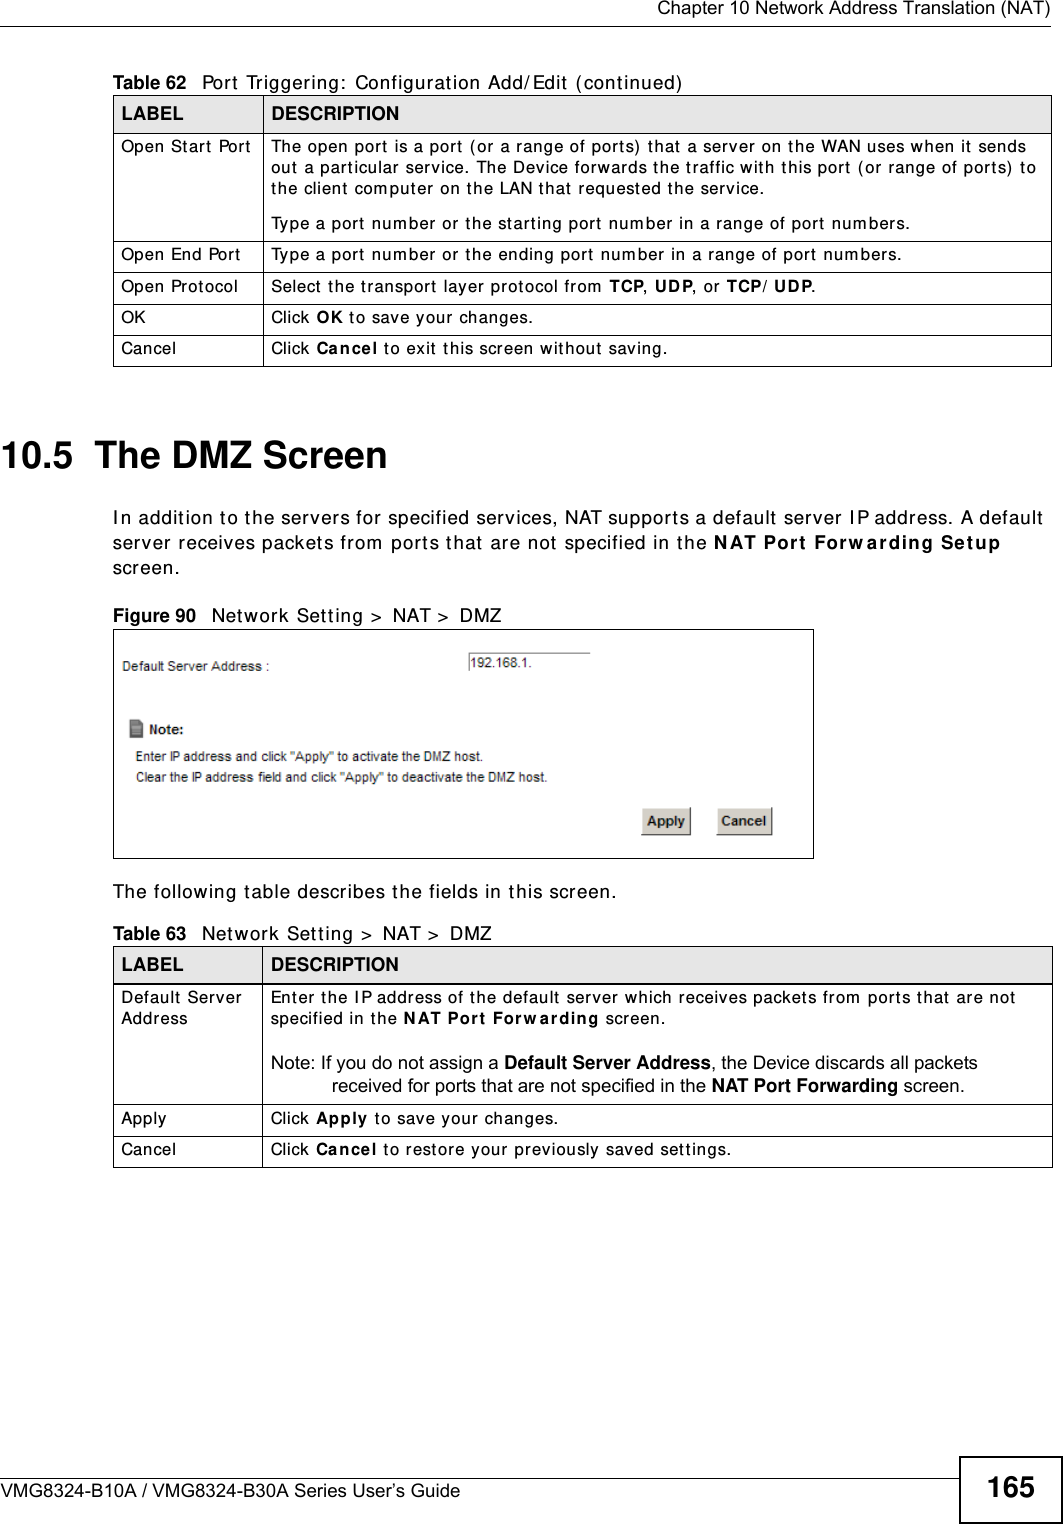  Chapter 10 Network Address Translation (NAT)VMG8324-B10A / VMG8324-B30A Series User’s Guide 16510.5  The DMZ ScreenI n addit ion to the servers for specified services, NAT support s a default  server I P address. A default  server receives packet s from  port s t hat  are not specified in t he N AT Port  For w ar ding Set u p screen.Figure 90   Net work Set t ing &gt;  NAT &gt;  DMZ The following t able describes t he fields in t his screen. Open St art Port The open port  is a port  ( or a range of port s)  t hat  a server on the WAN uses when it  sends out  a part icular ser vice. The Device forwards t he traffic w it h t his port  ( or  range of port s)  to the client  com put er on t he LAN t hat  request ed the service. Type a port num ber or  t he st art ing port  num ber  in a range of port  num bers.Open End Port   Type a port  num ber or the ending port num ber in a range of port  num bers.Open Protocol Select  the transport  layer prot ocol from  TCP, UDP, or  TCP/ UDP.OK Click OK to save your changes.Cancel Click Ca nce l t o exit  t his screen w it hout saving.Table 62   Port  Triggering:  Configuration Add/ Edit ( cont inued)LABEL DESCRIPTIONTable 63   Net work Sett ing &gt;  NAT &gt;  DMZLABEL DESCRIPTIONDefault  Server AddressEnt er t he I P address of the default  server which receives packet s from  port s that are not specified in t he N AT Port  For w ardin g screen. Note: If you do not assign a Default Server Address, the Device discards all packets received for ports that are not specified in the NAT Port Forwarding screen.Apply Click Apply t o save your changes.Cancel Click Ca n cel t o rest ore your pr eviously saved set t ings.